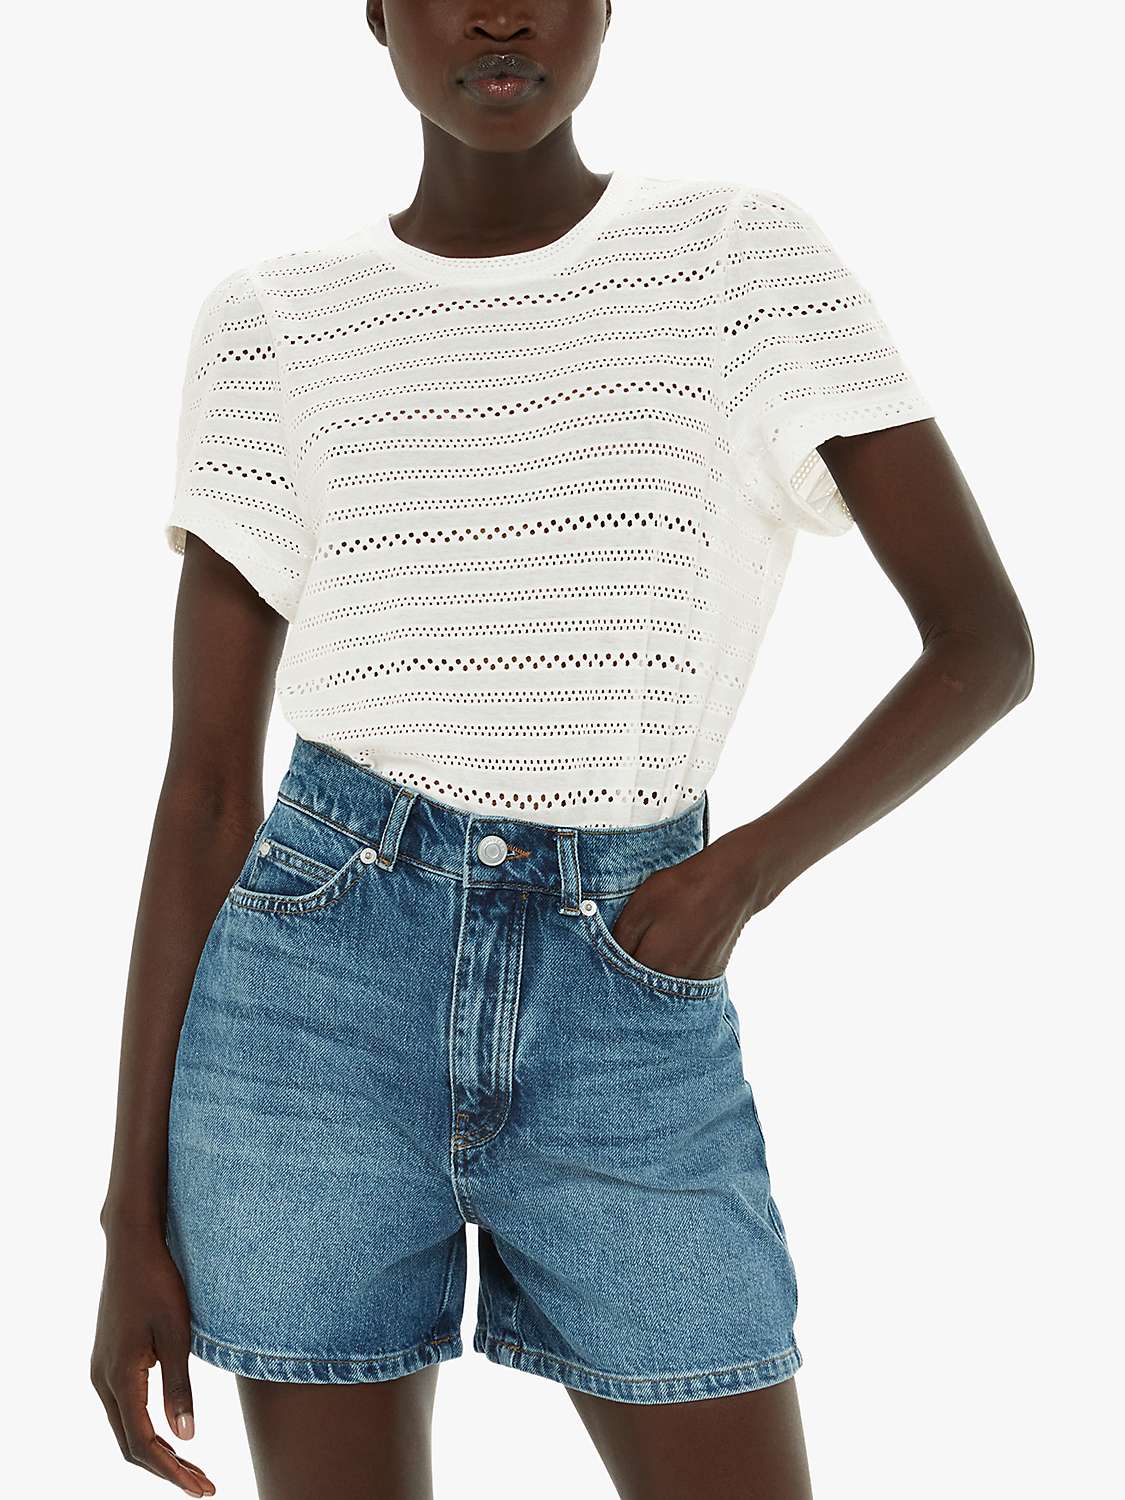 Buy Whistles Broderie Top, Ivory Online at johnlewis.com